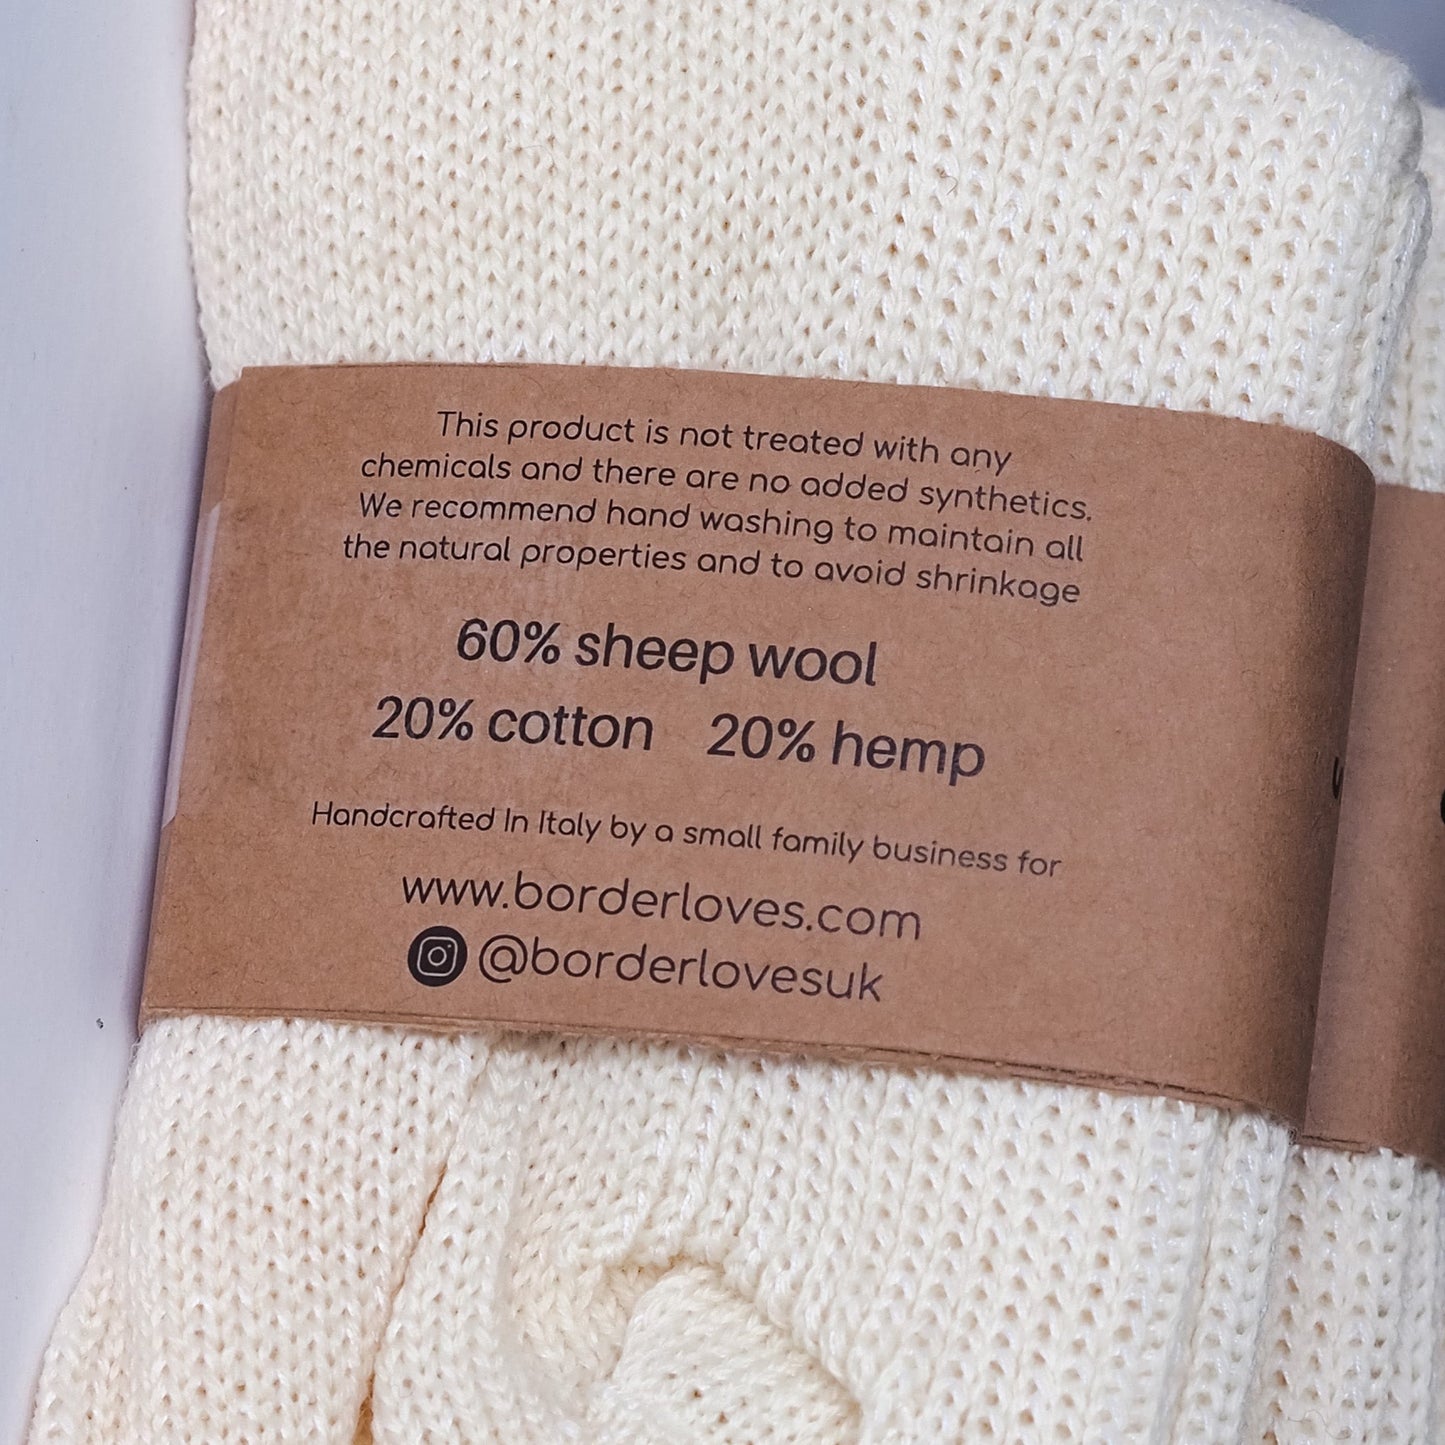 Composition label of all natural luxury socks by Border Loves showing 60% Sheep Wool, 20% Cotton and 20% Hemp content